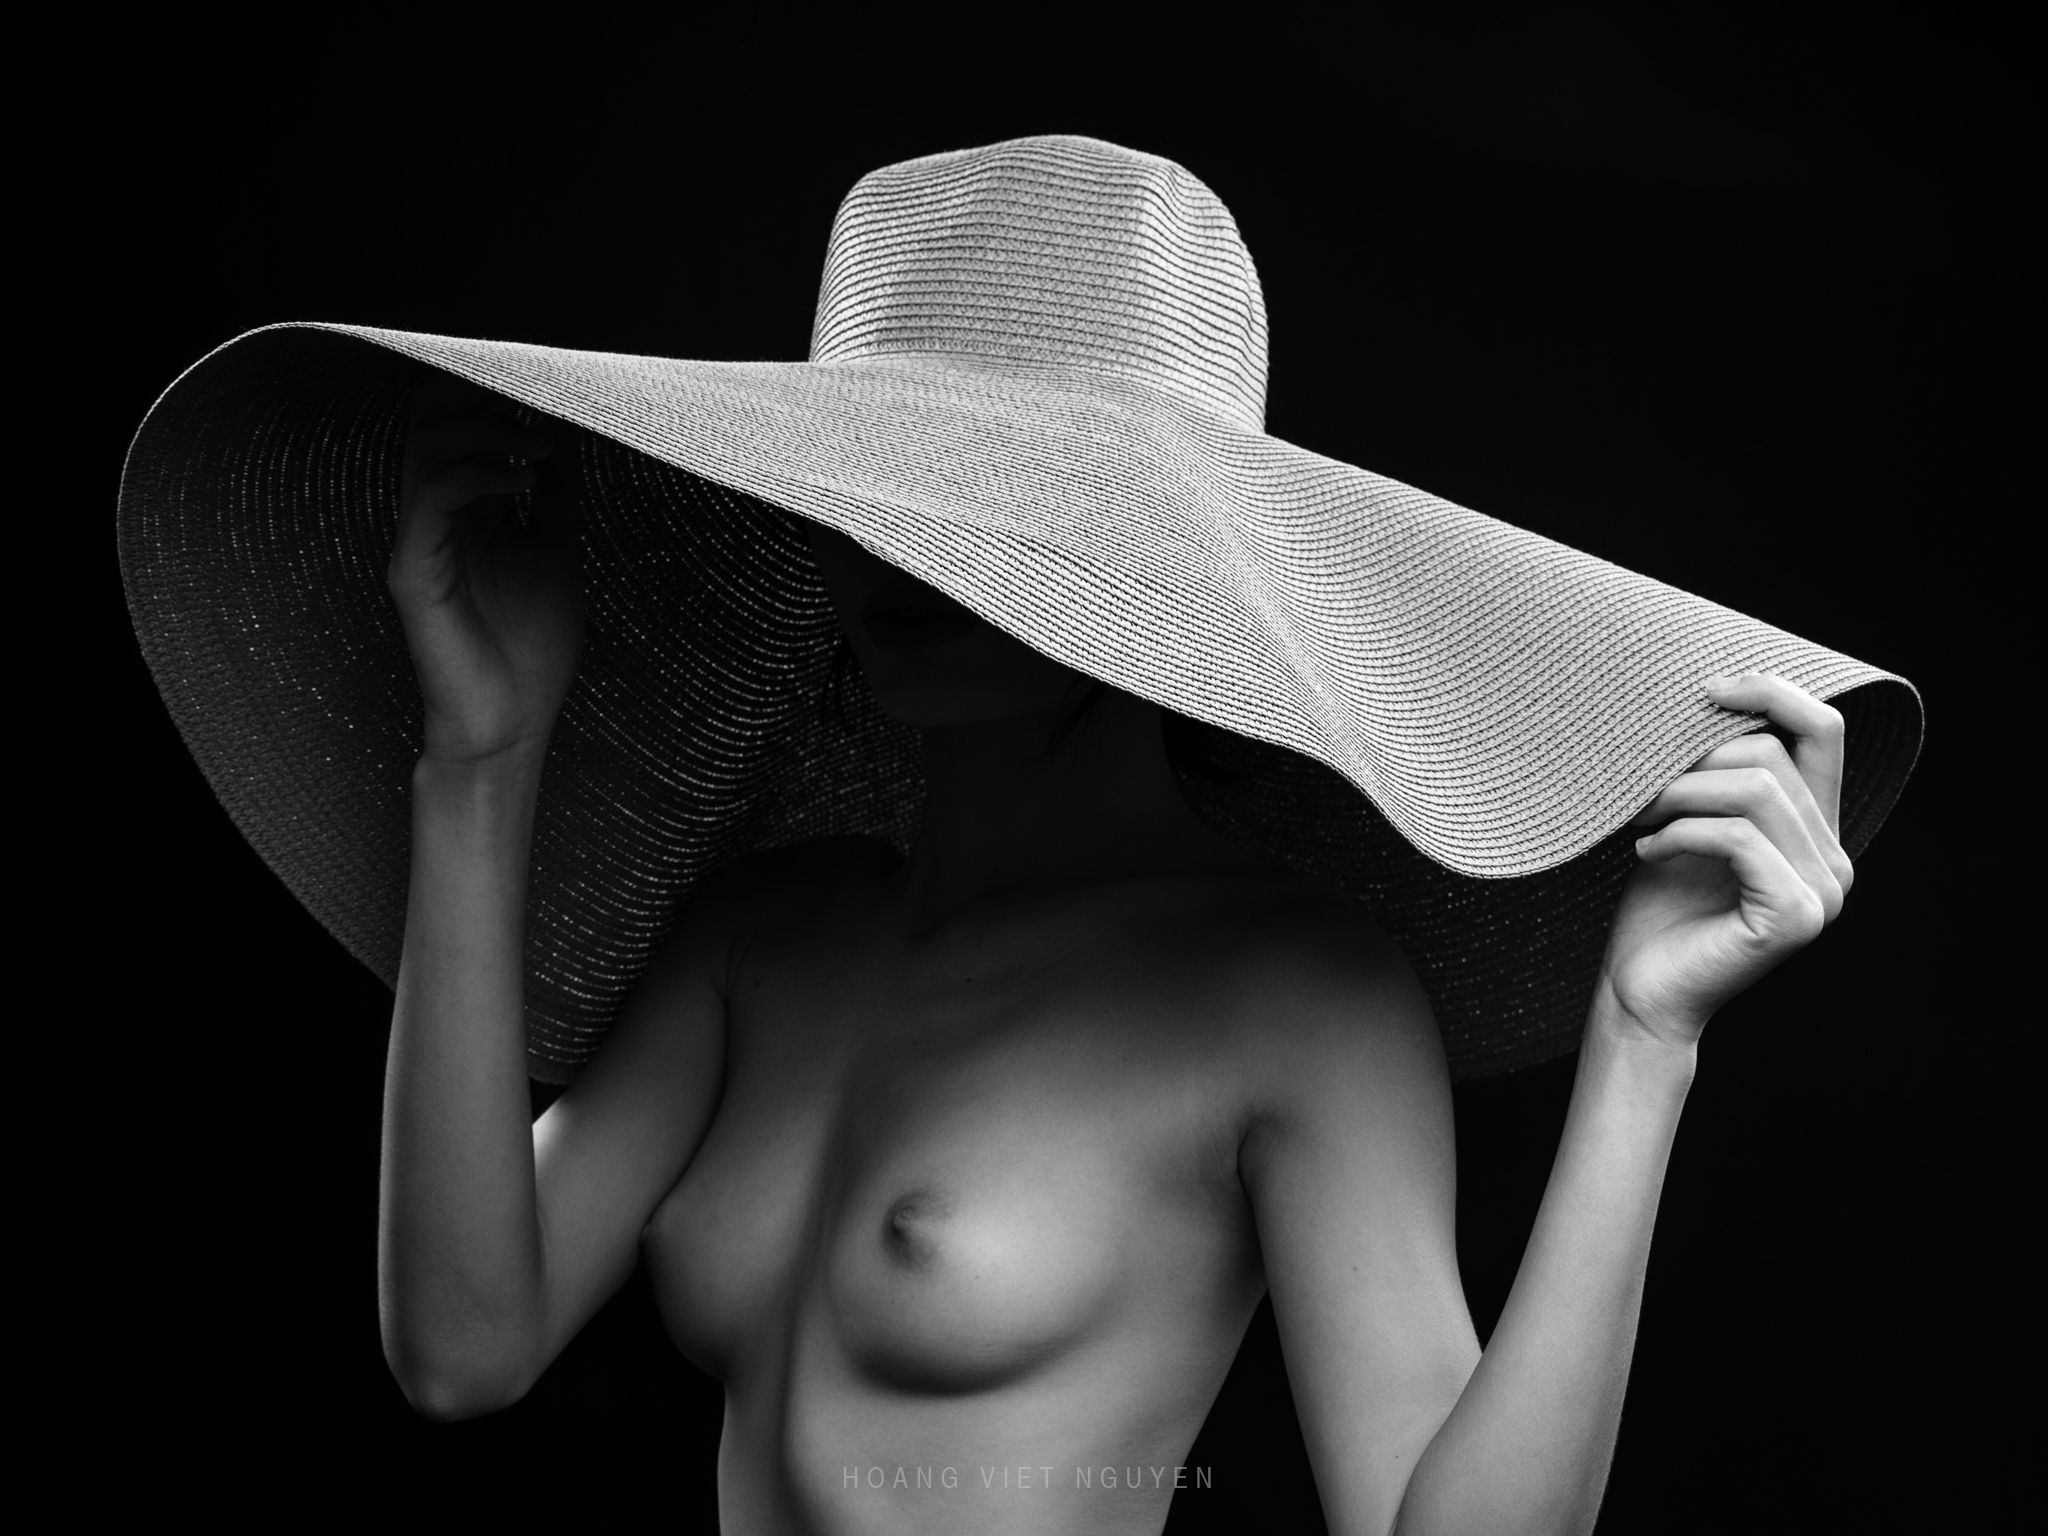 fine nude, nude, glamour, asian, vietnam, vietnamese, body, black and white, bw, bnw, monochrome, mood, hat, Nguyen Hoang Viet